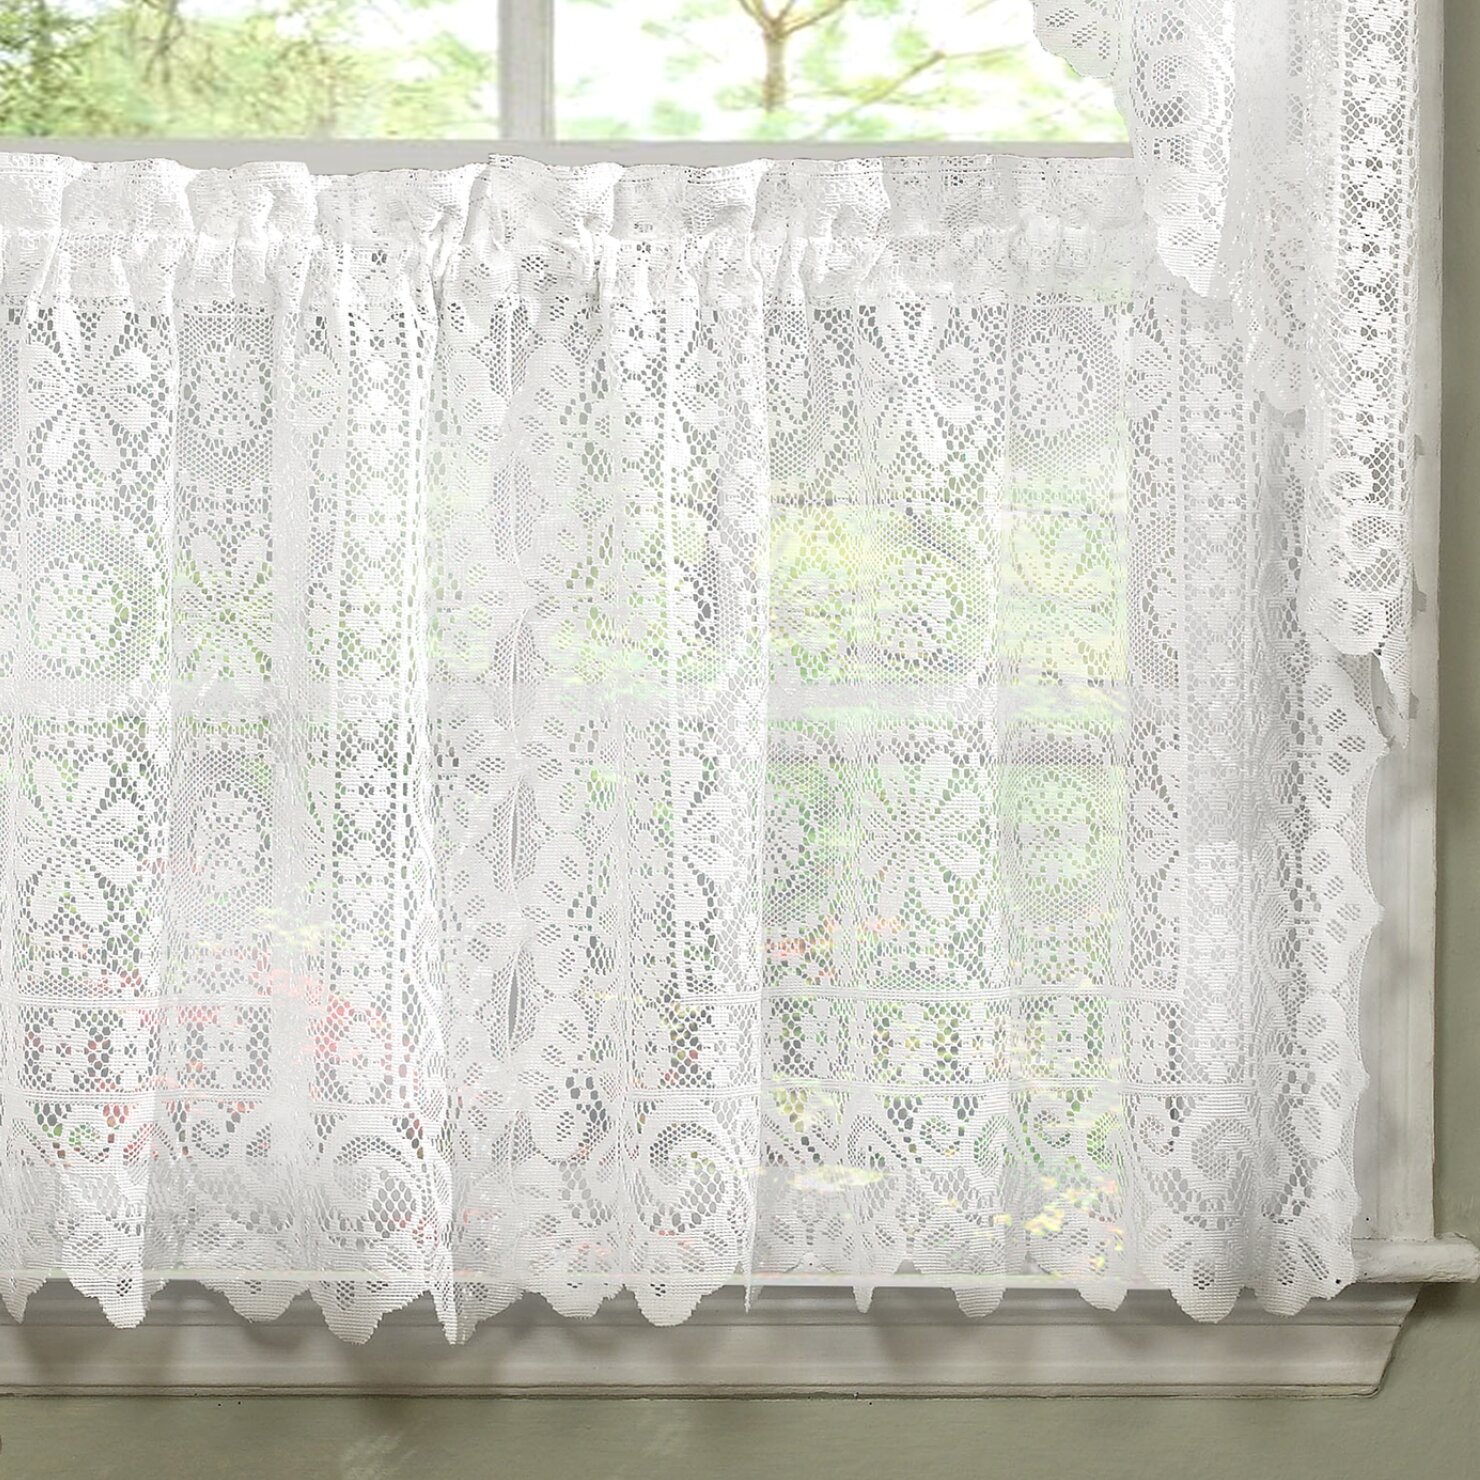 Vintage Style Lace Coffee Curtain Kitchen Curtain Vintage Style Window Scarf 